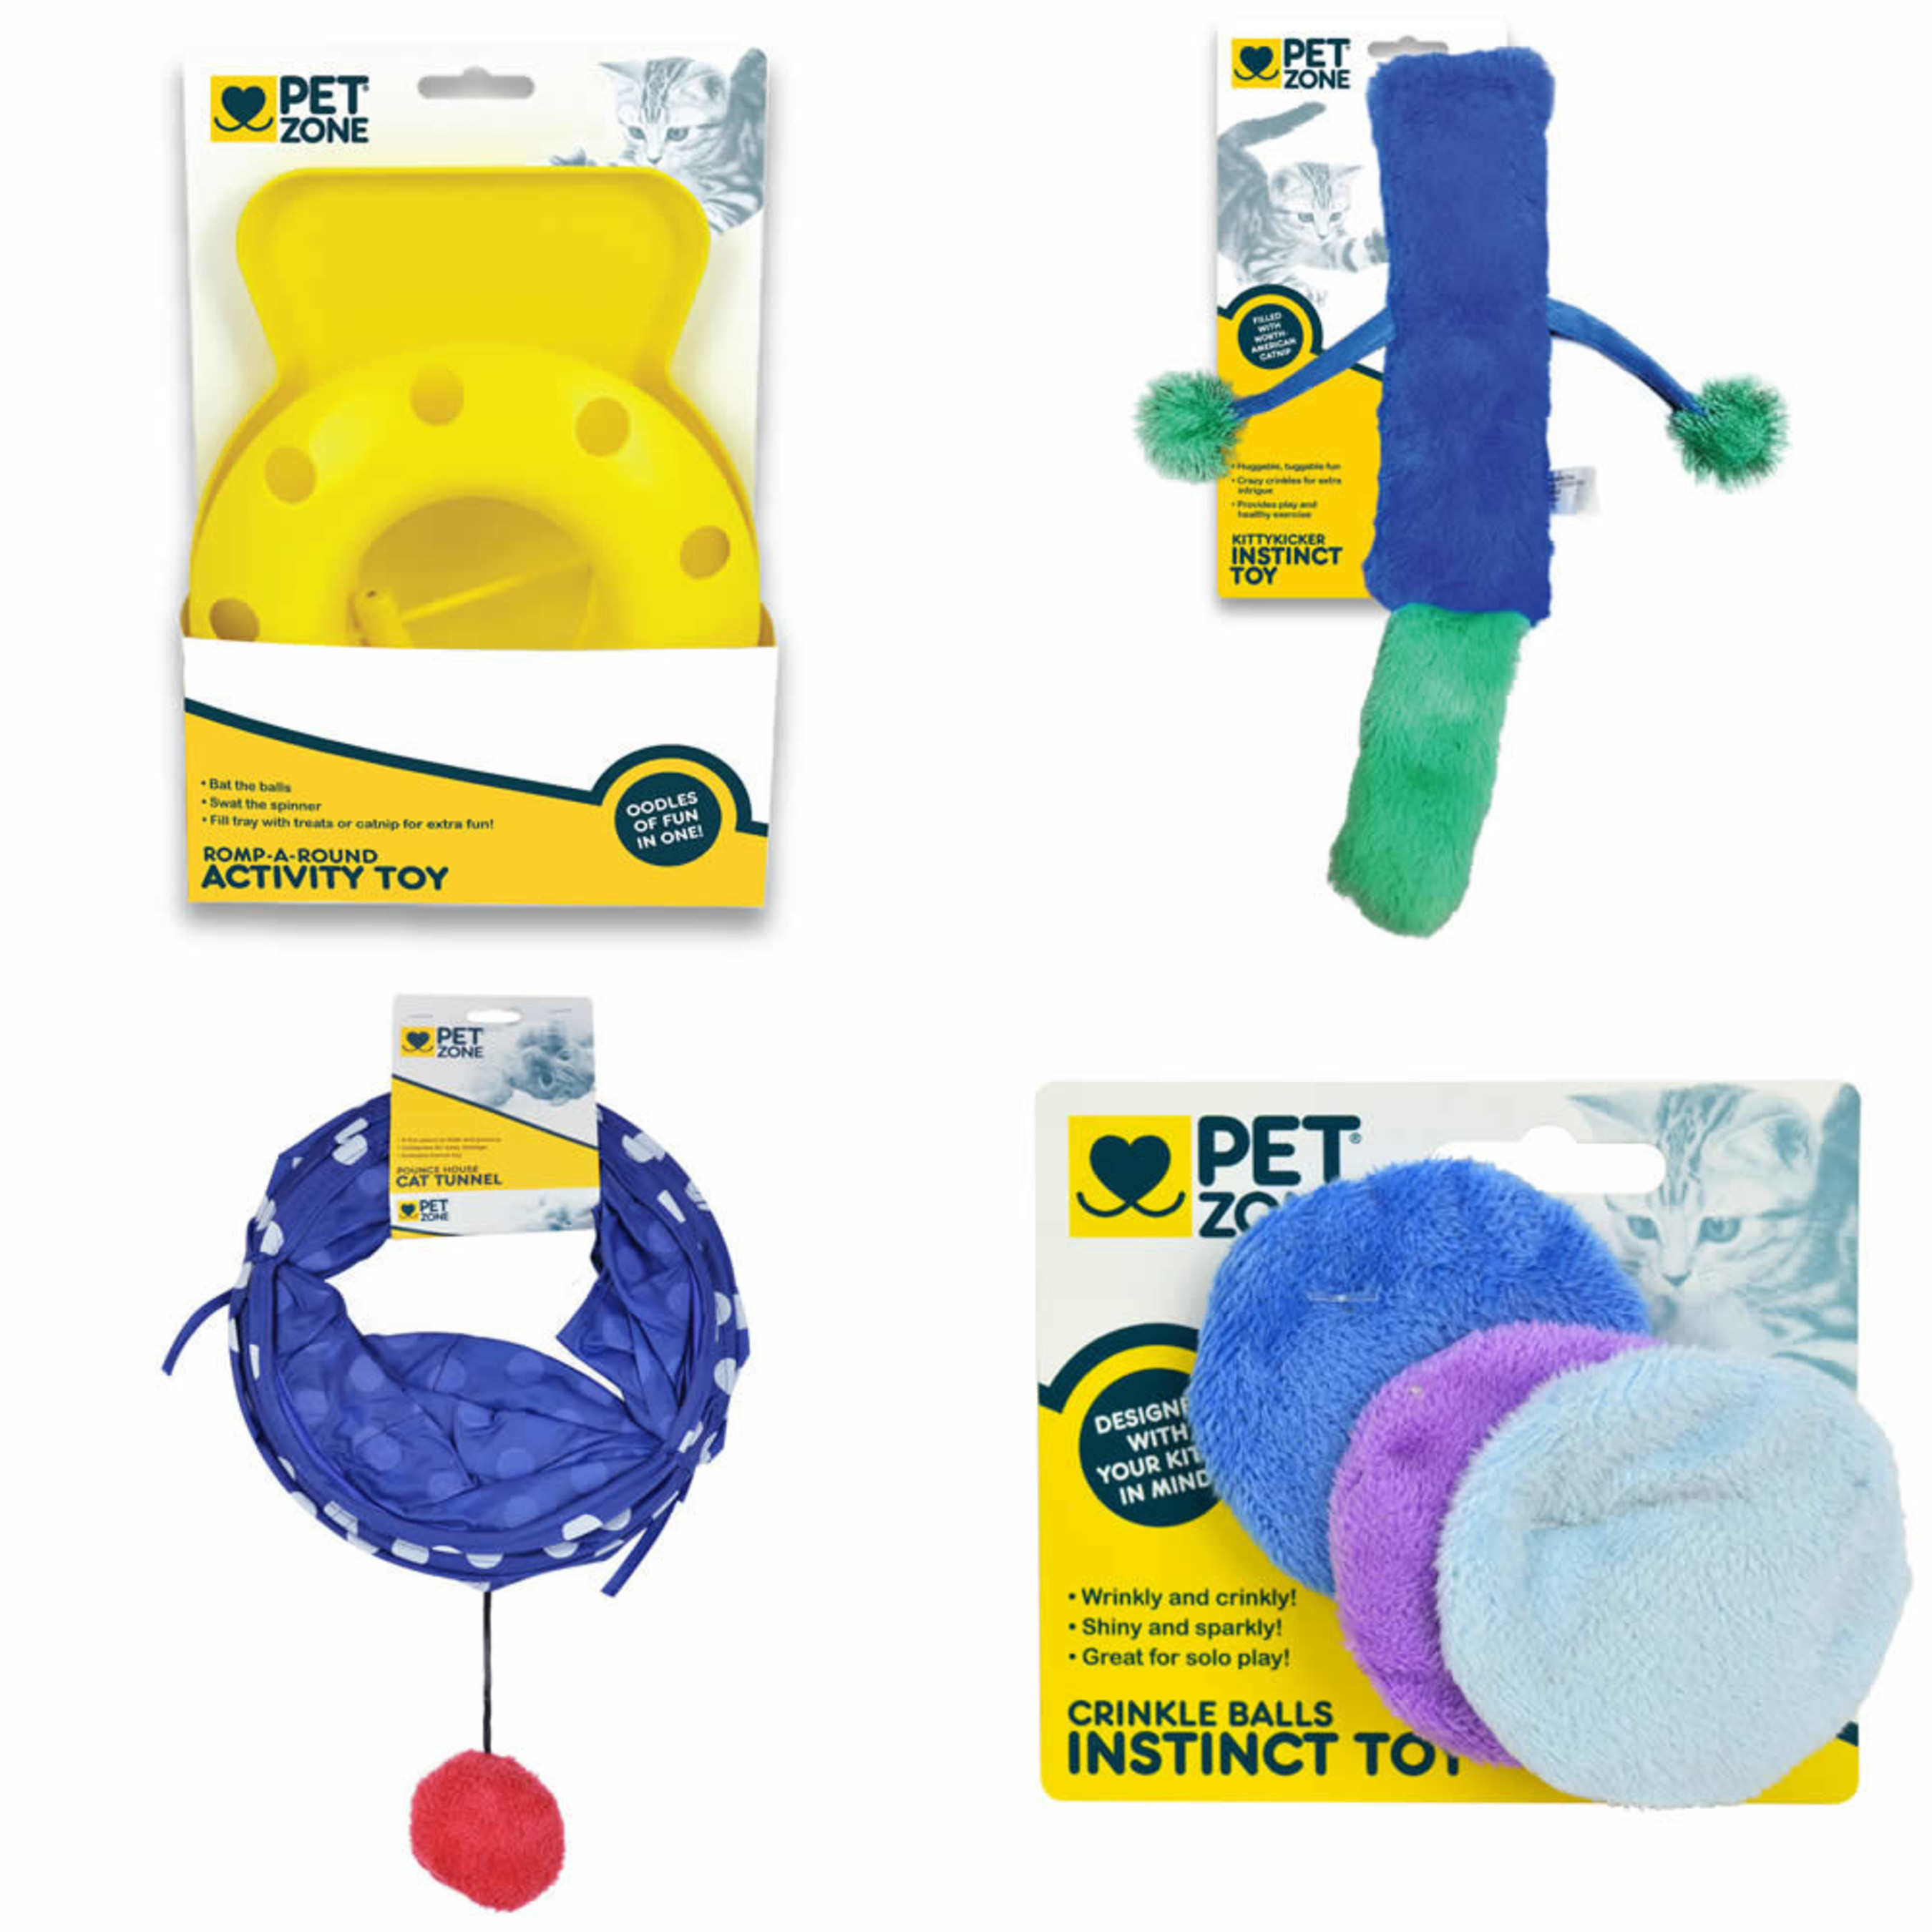 Pet Zone is adding four new products to its line of cat toys. The new toys include the Pet Zone Romp-A-Round Floor Toy, Pet Zone KittyKicker, Pet Zone Pounce House Cat Tunnel, and Pet Zone Catnip Crinkle Disks.